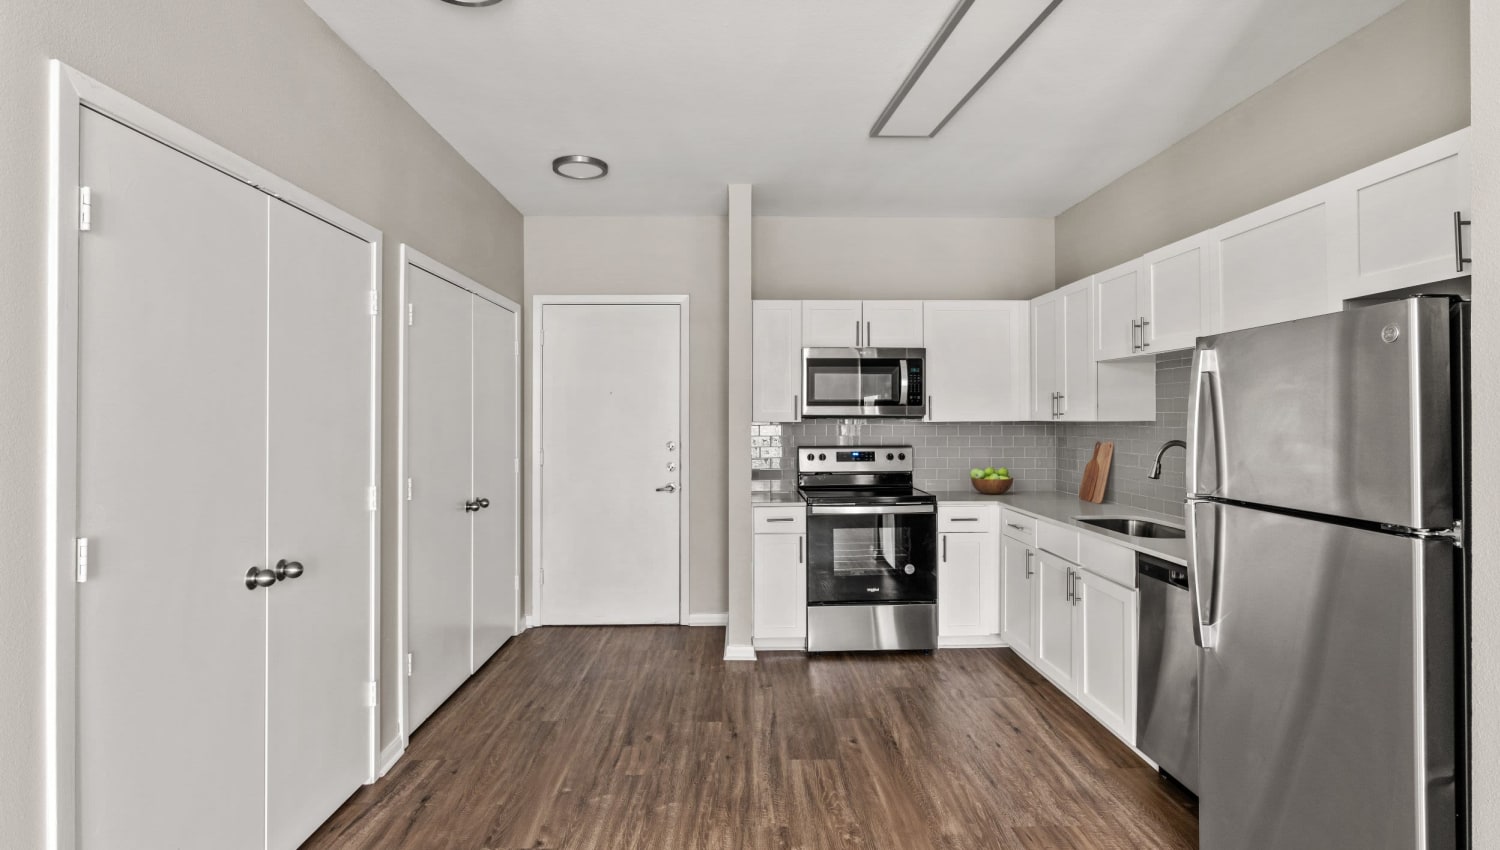 Spacious model kitchen with hardwood flooring at Olympus Boulevard in Frisco, Texas